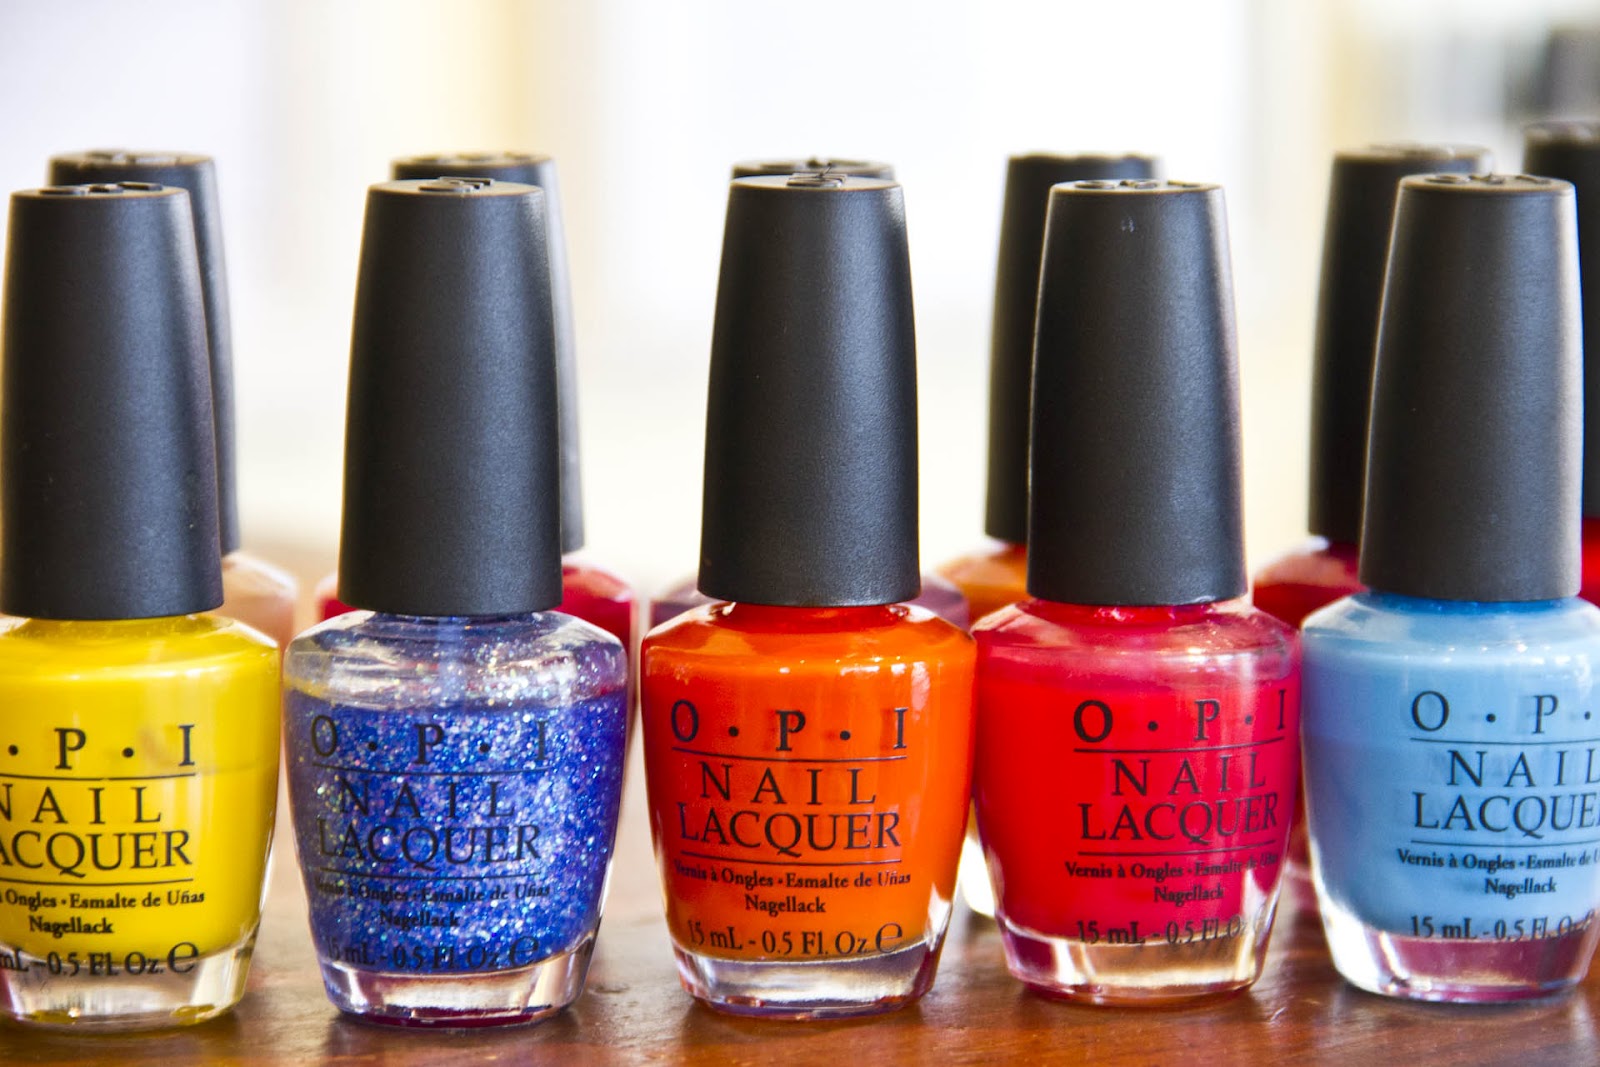 7. 10 Bold and Bright Nail Polish Colors to Try - wide 1